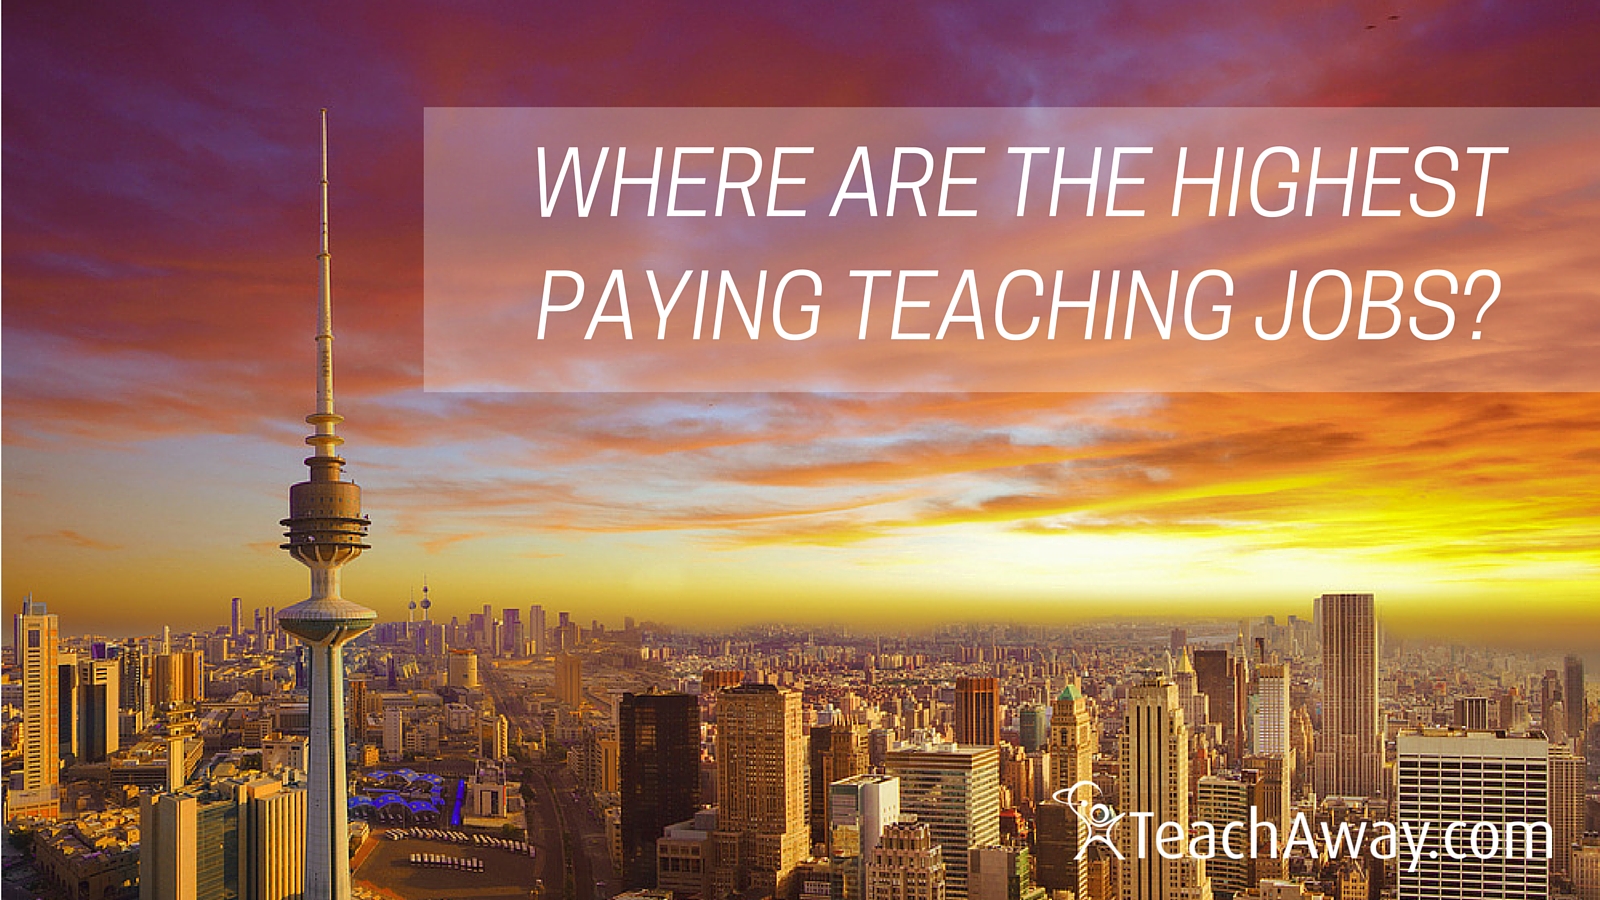 Top 3 places with high teacher salaries